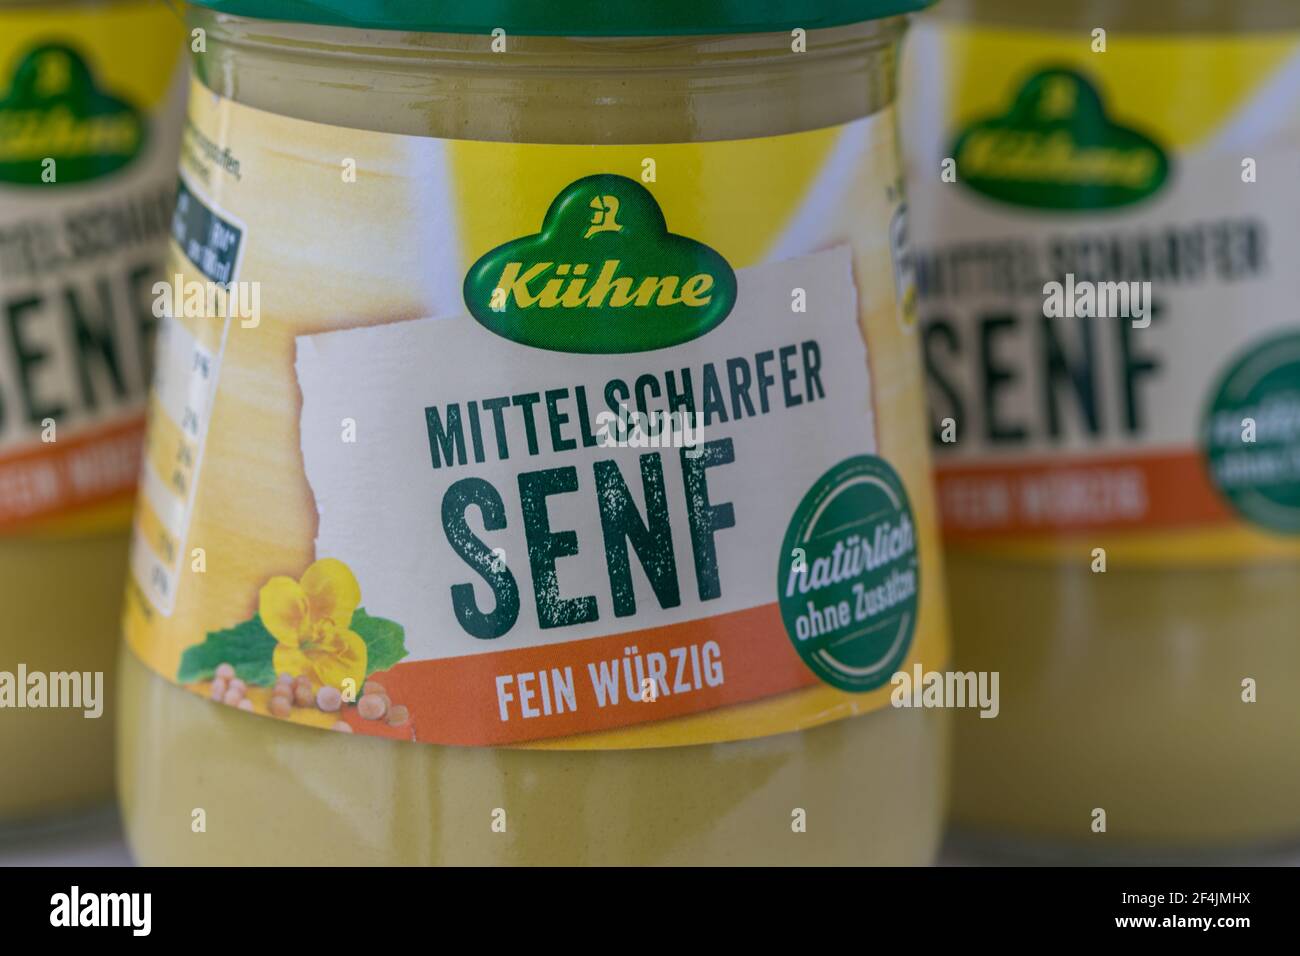 Hildesheim, Germany - March 21, 2021: Close-up of three mustard jar from the company Kühne with fokus on foreground Stock Photo